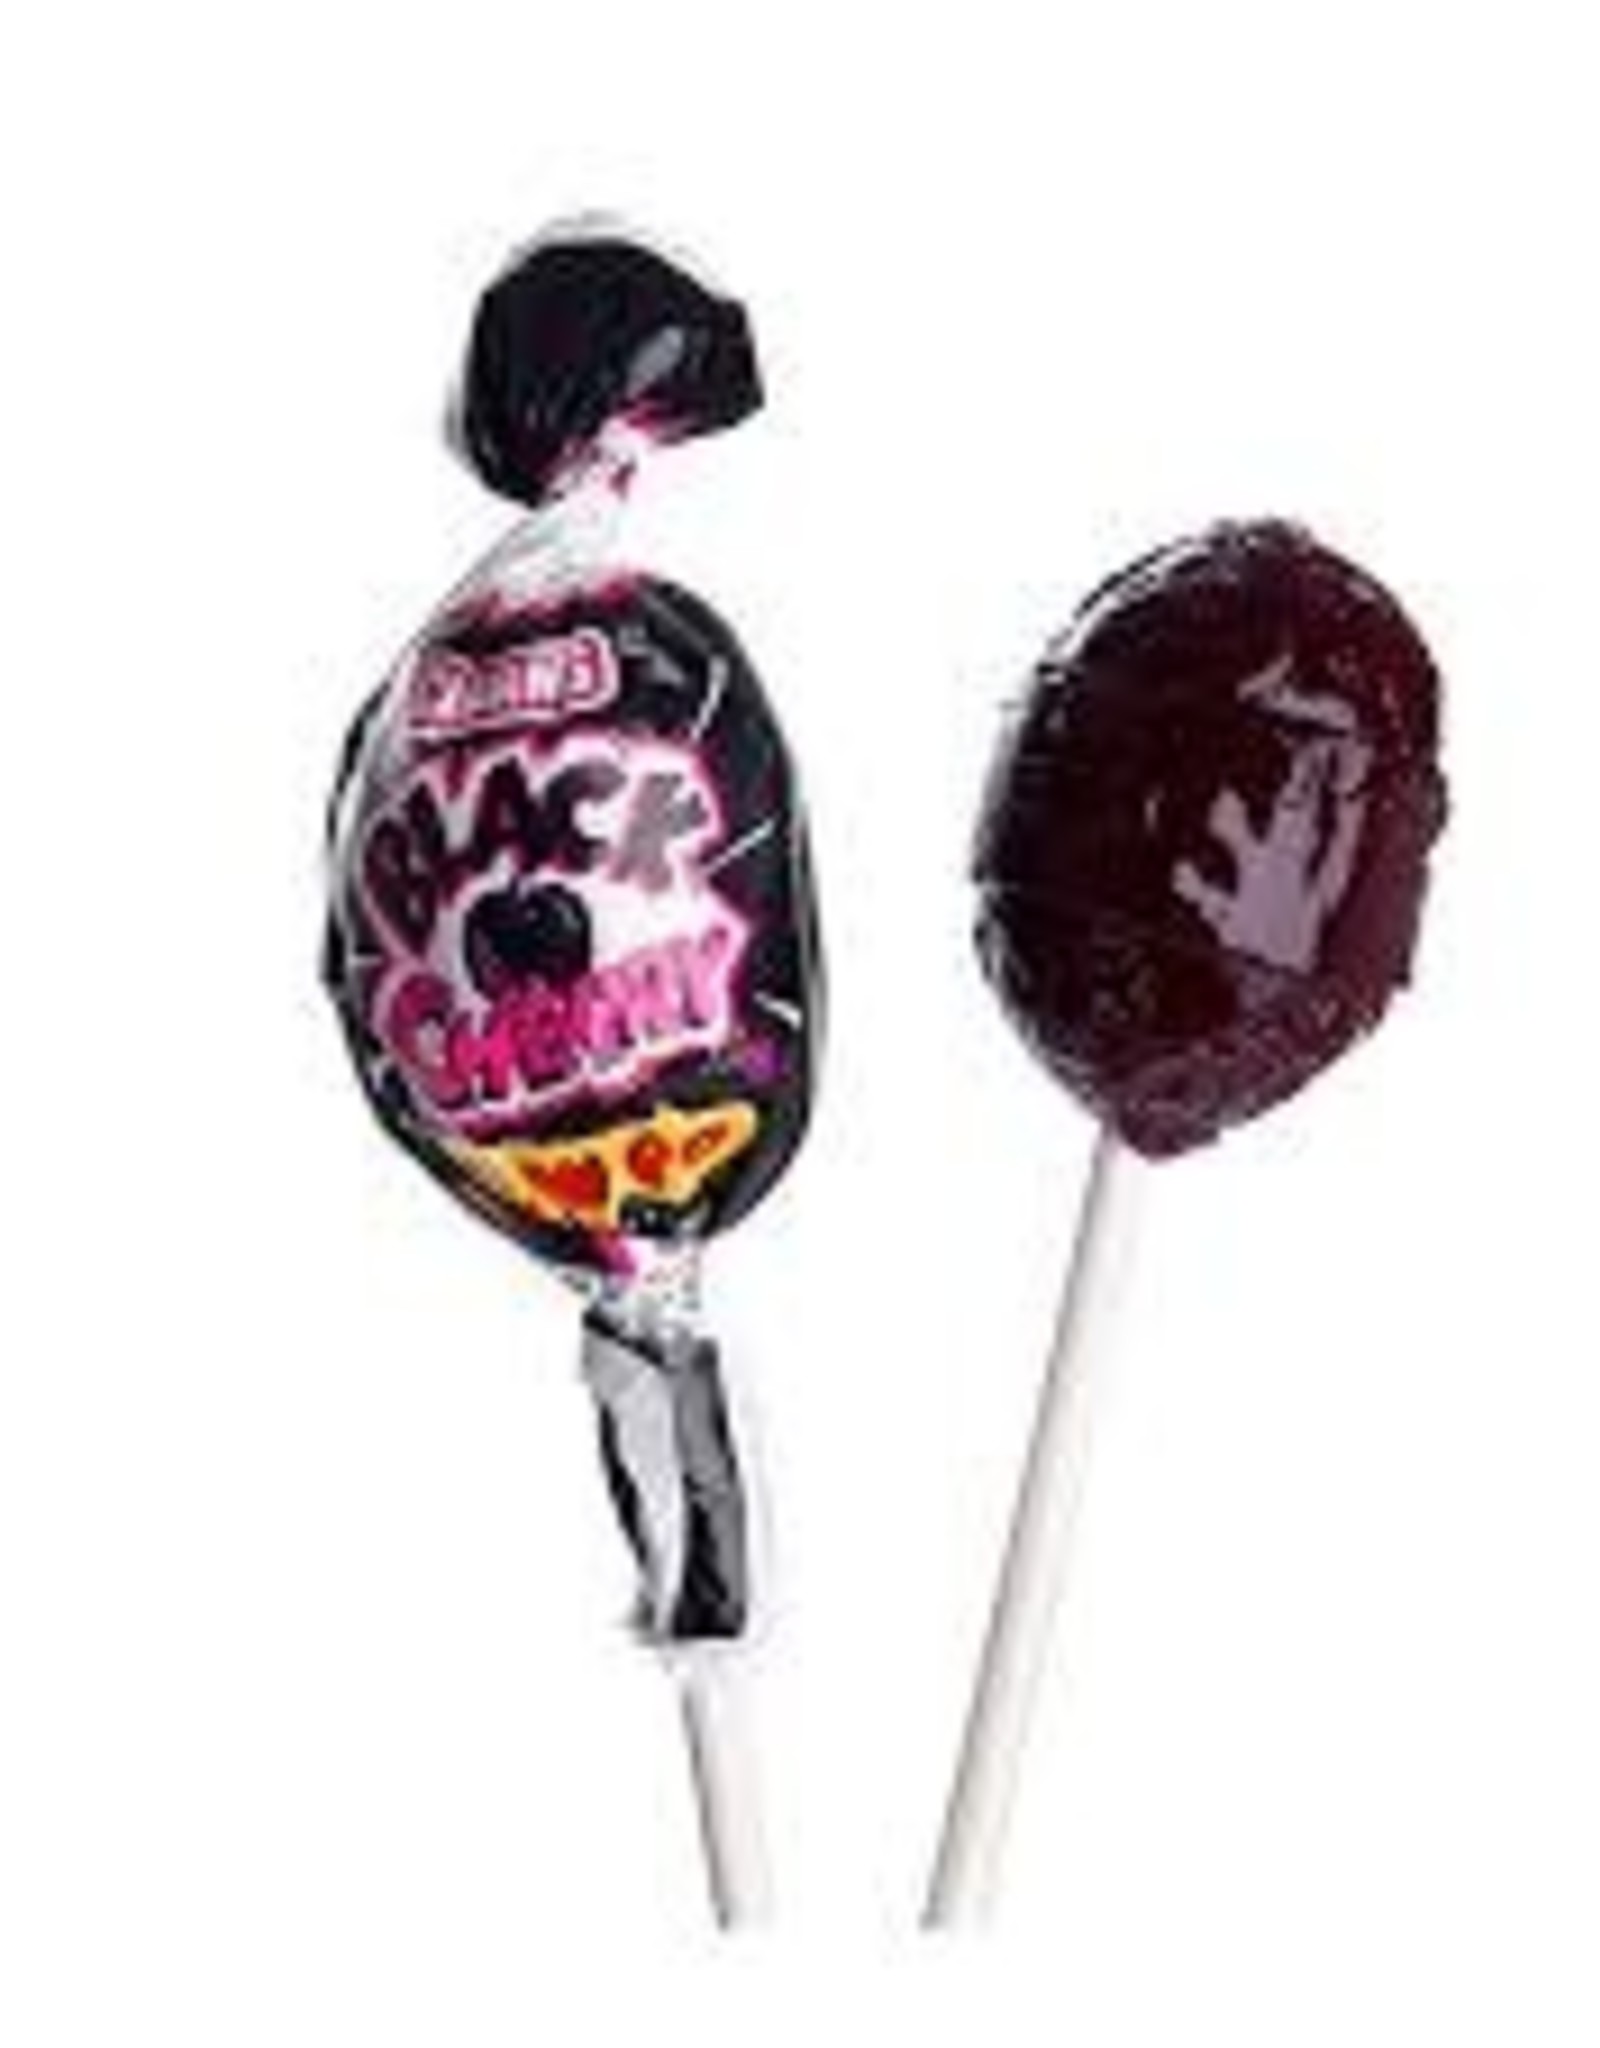 Pacific Candy Black Cherry Blow pop -Charms